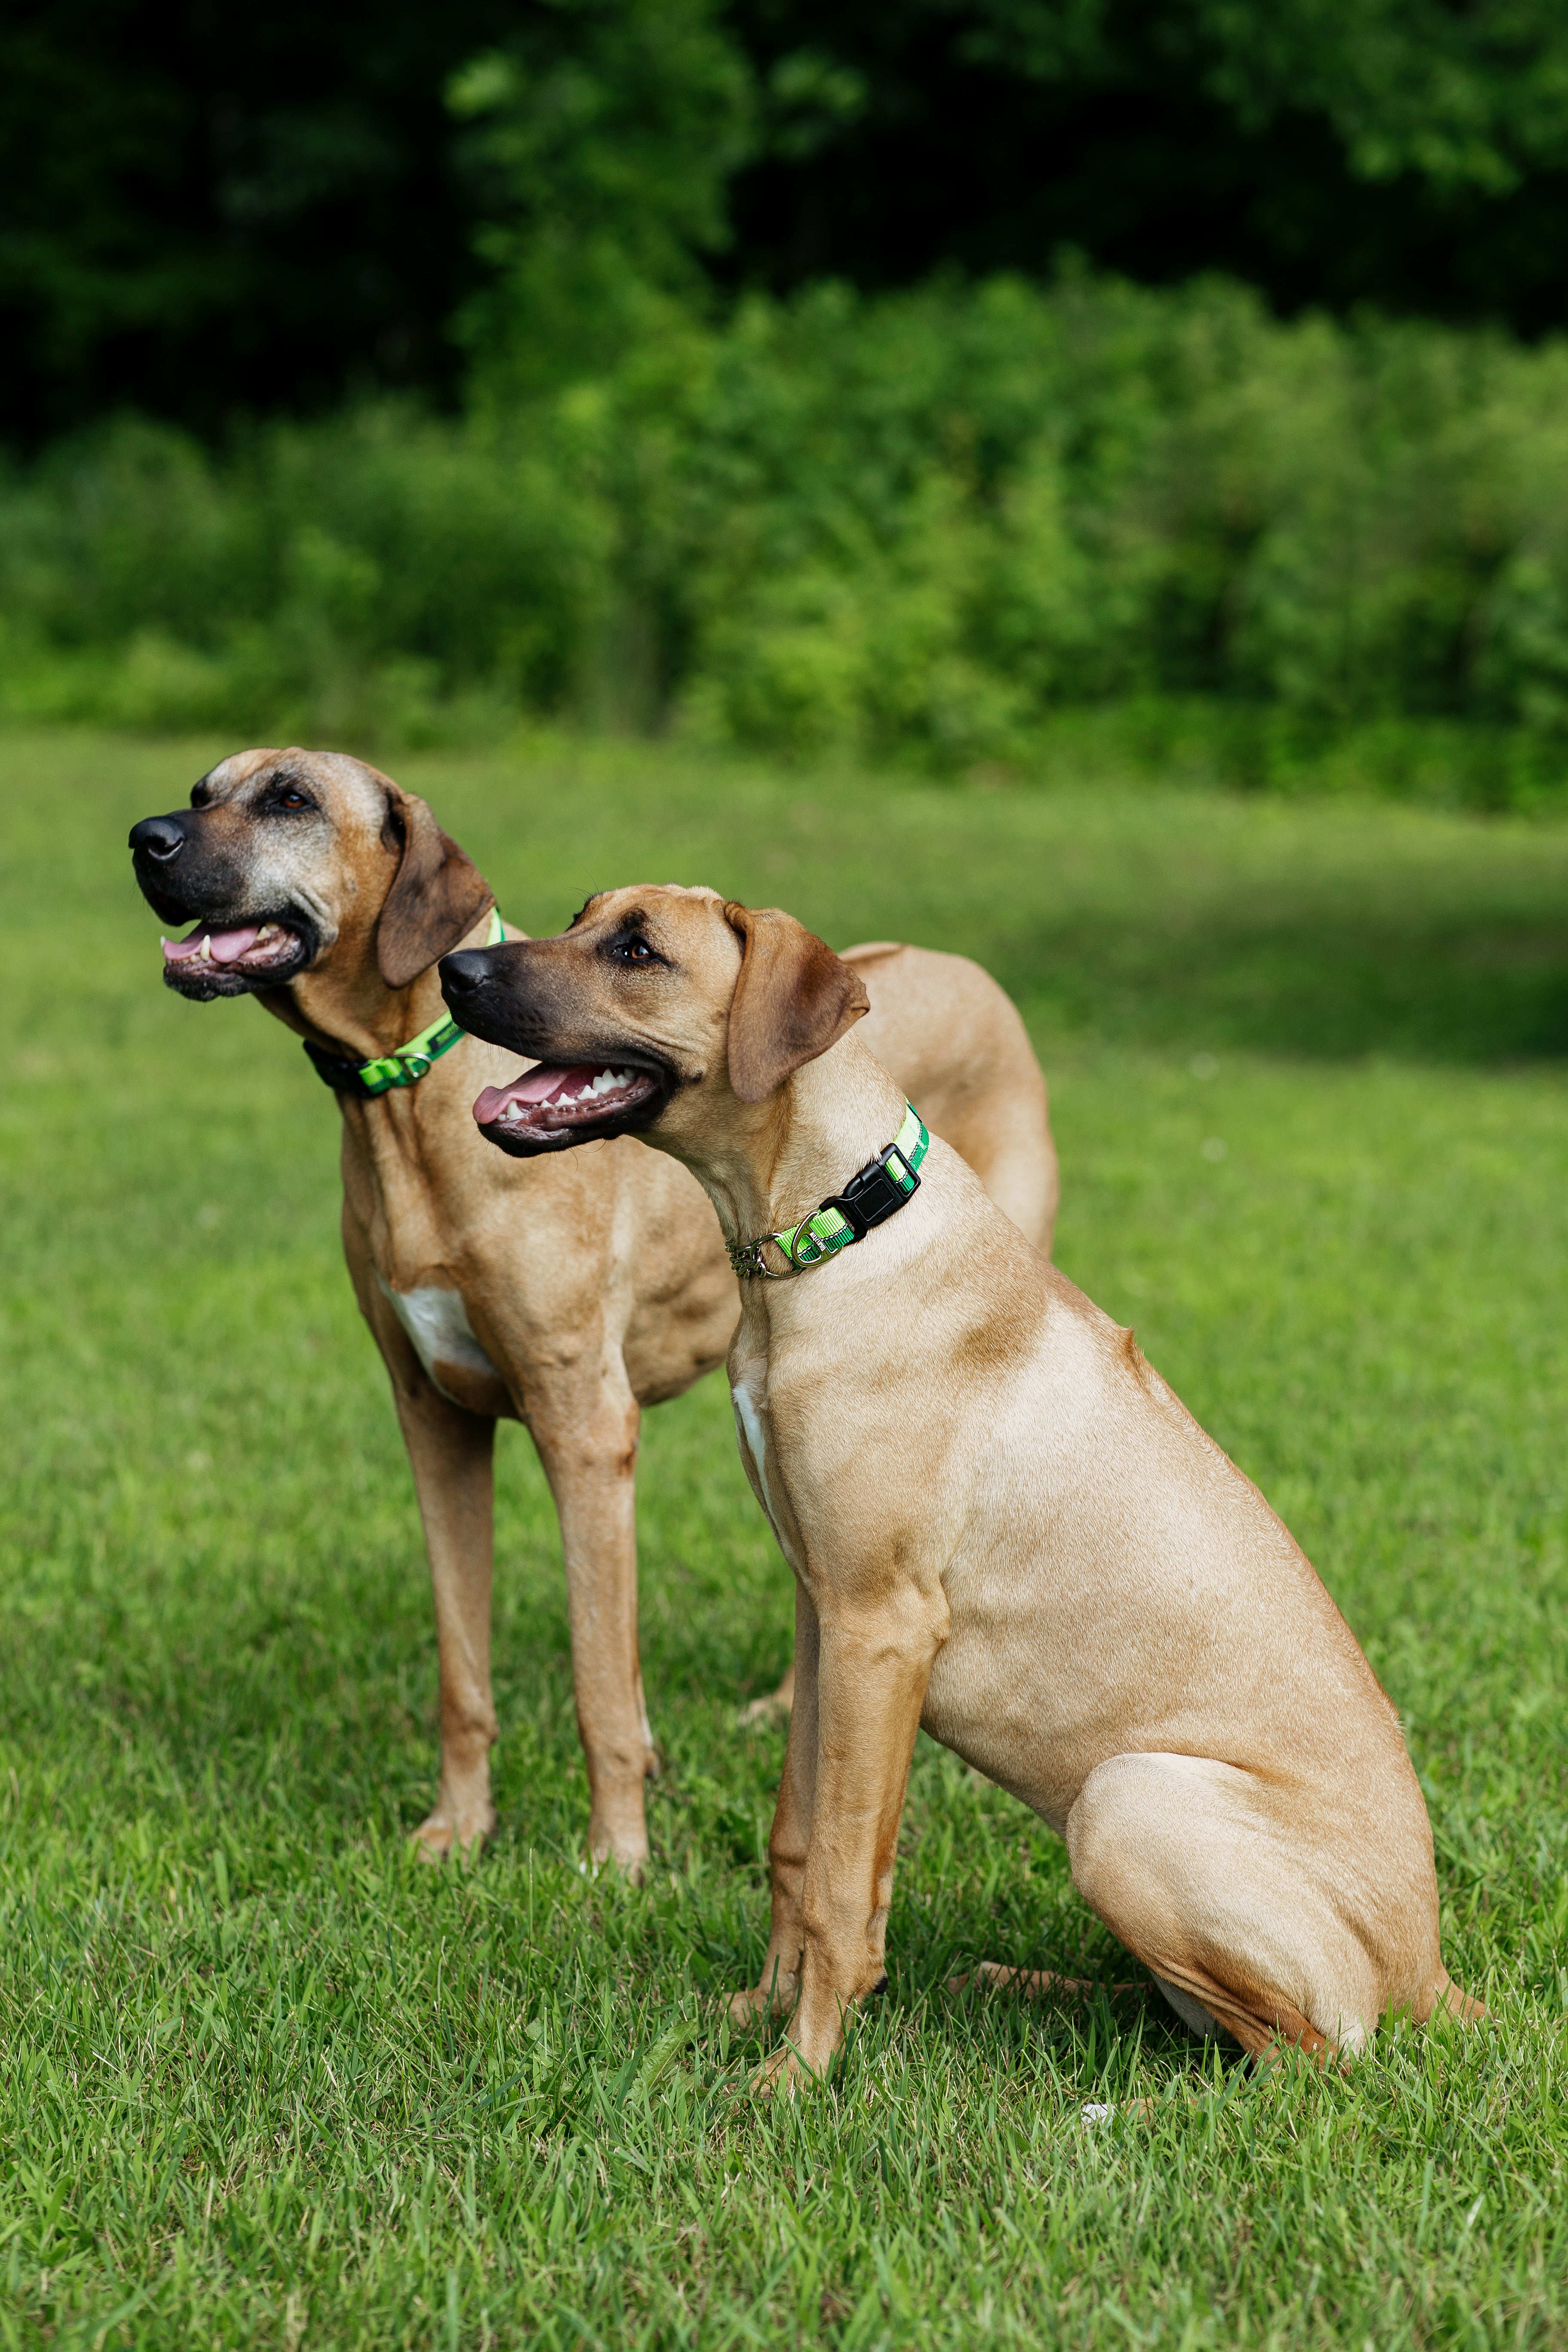 Two tan dogs sit in grass outside wearing green Mighty Paw collars.